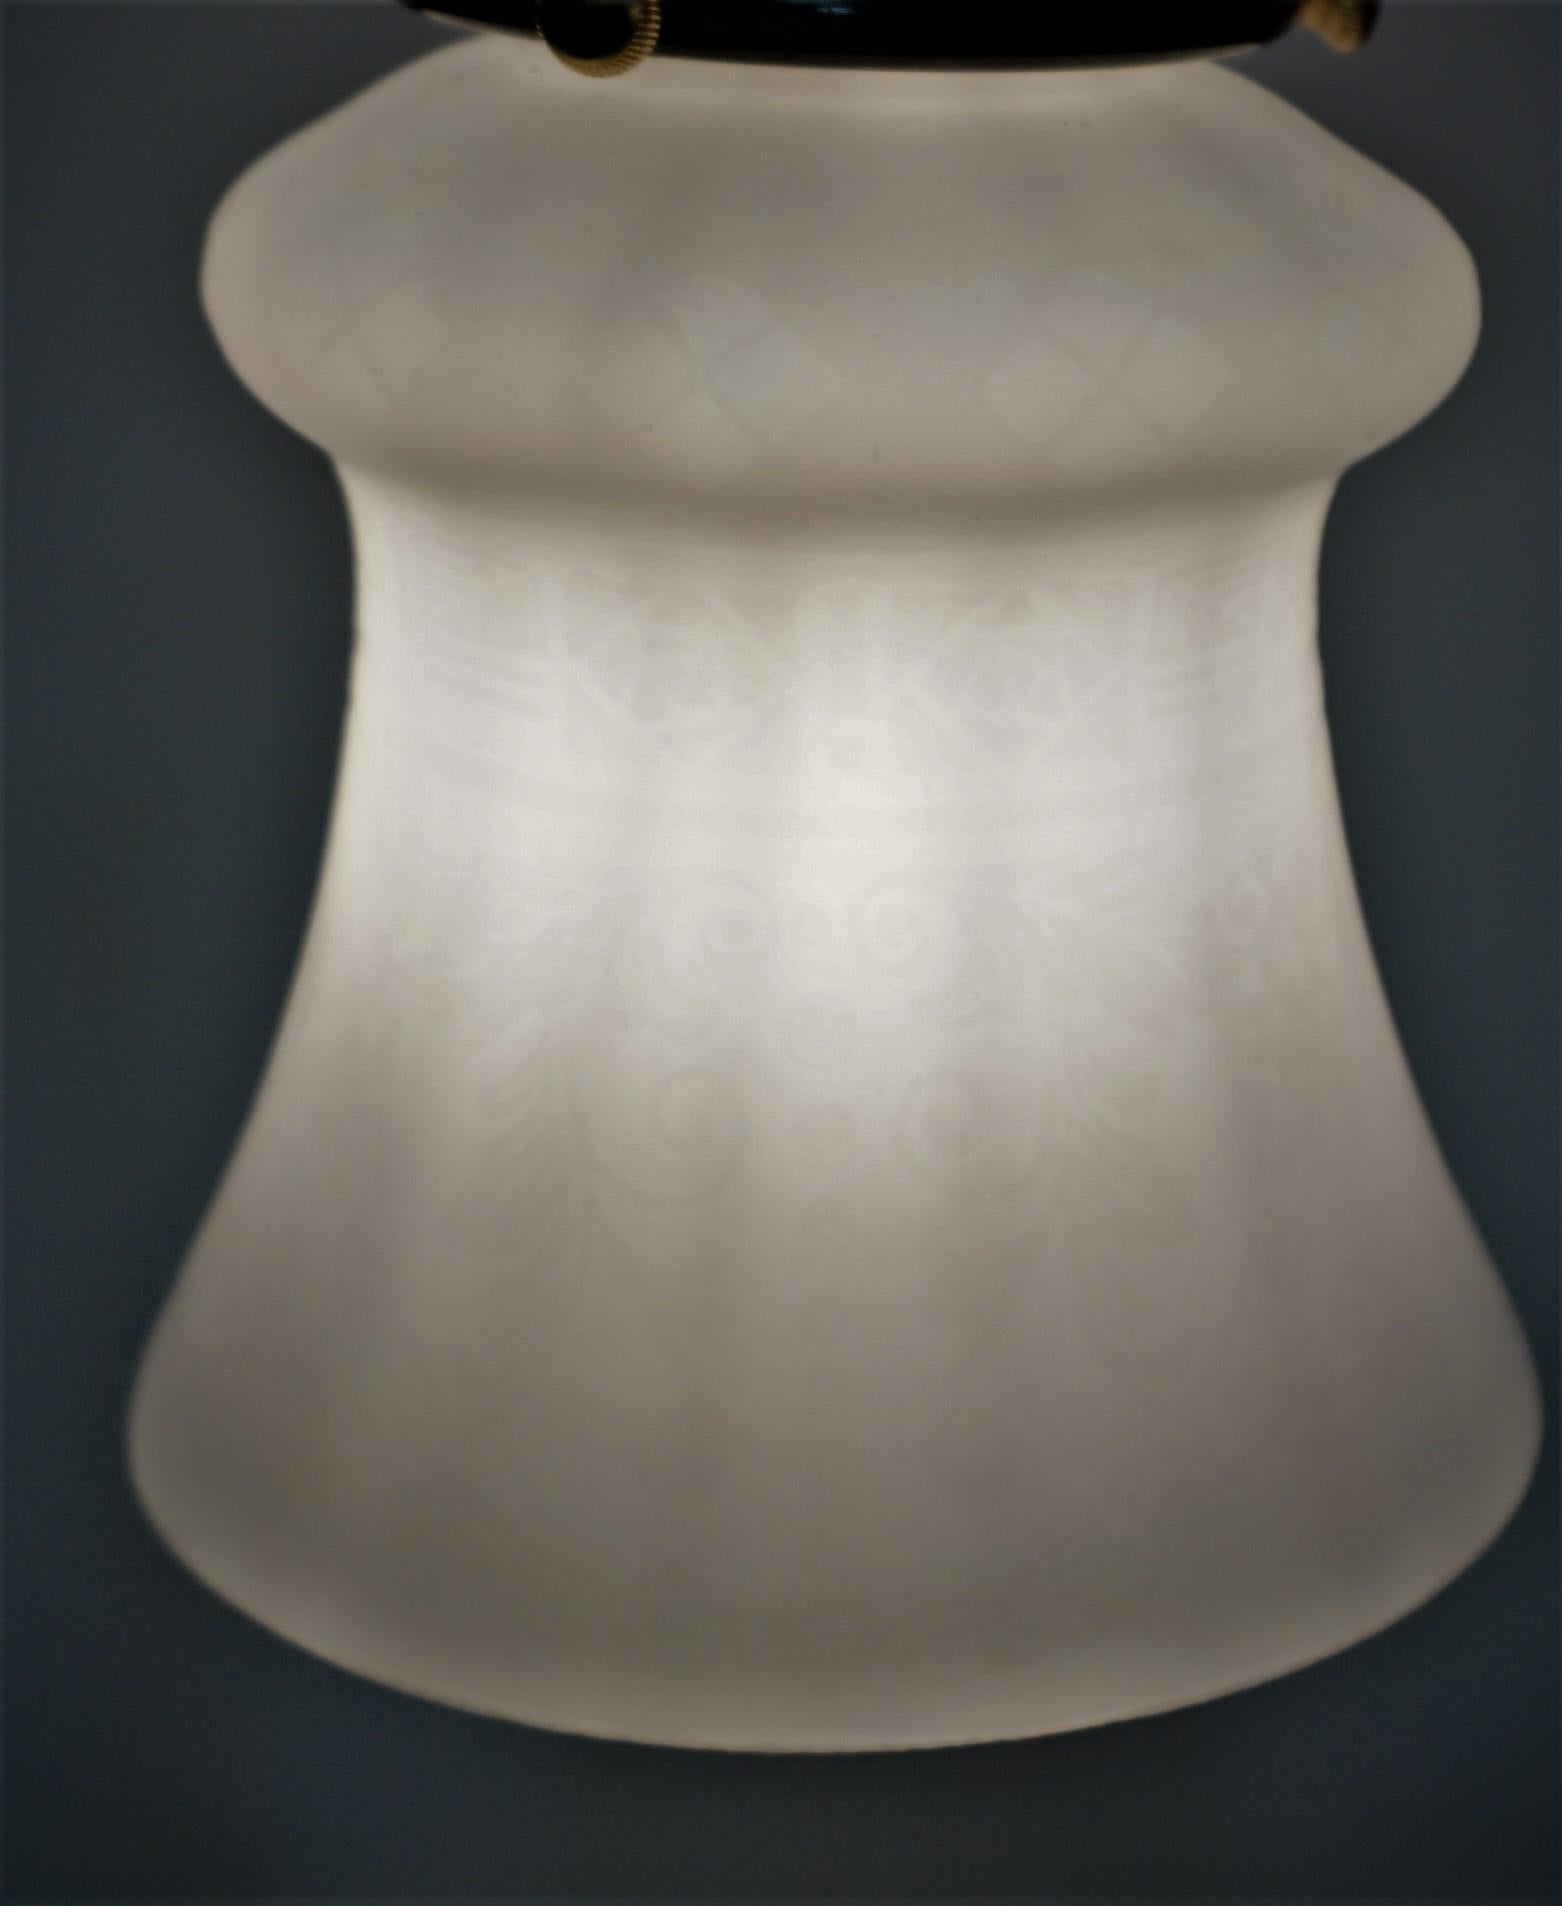 Elegant 2 tone color bronze desk or table lamp with etched glass shade.